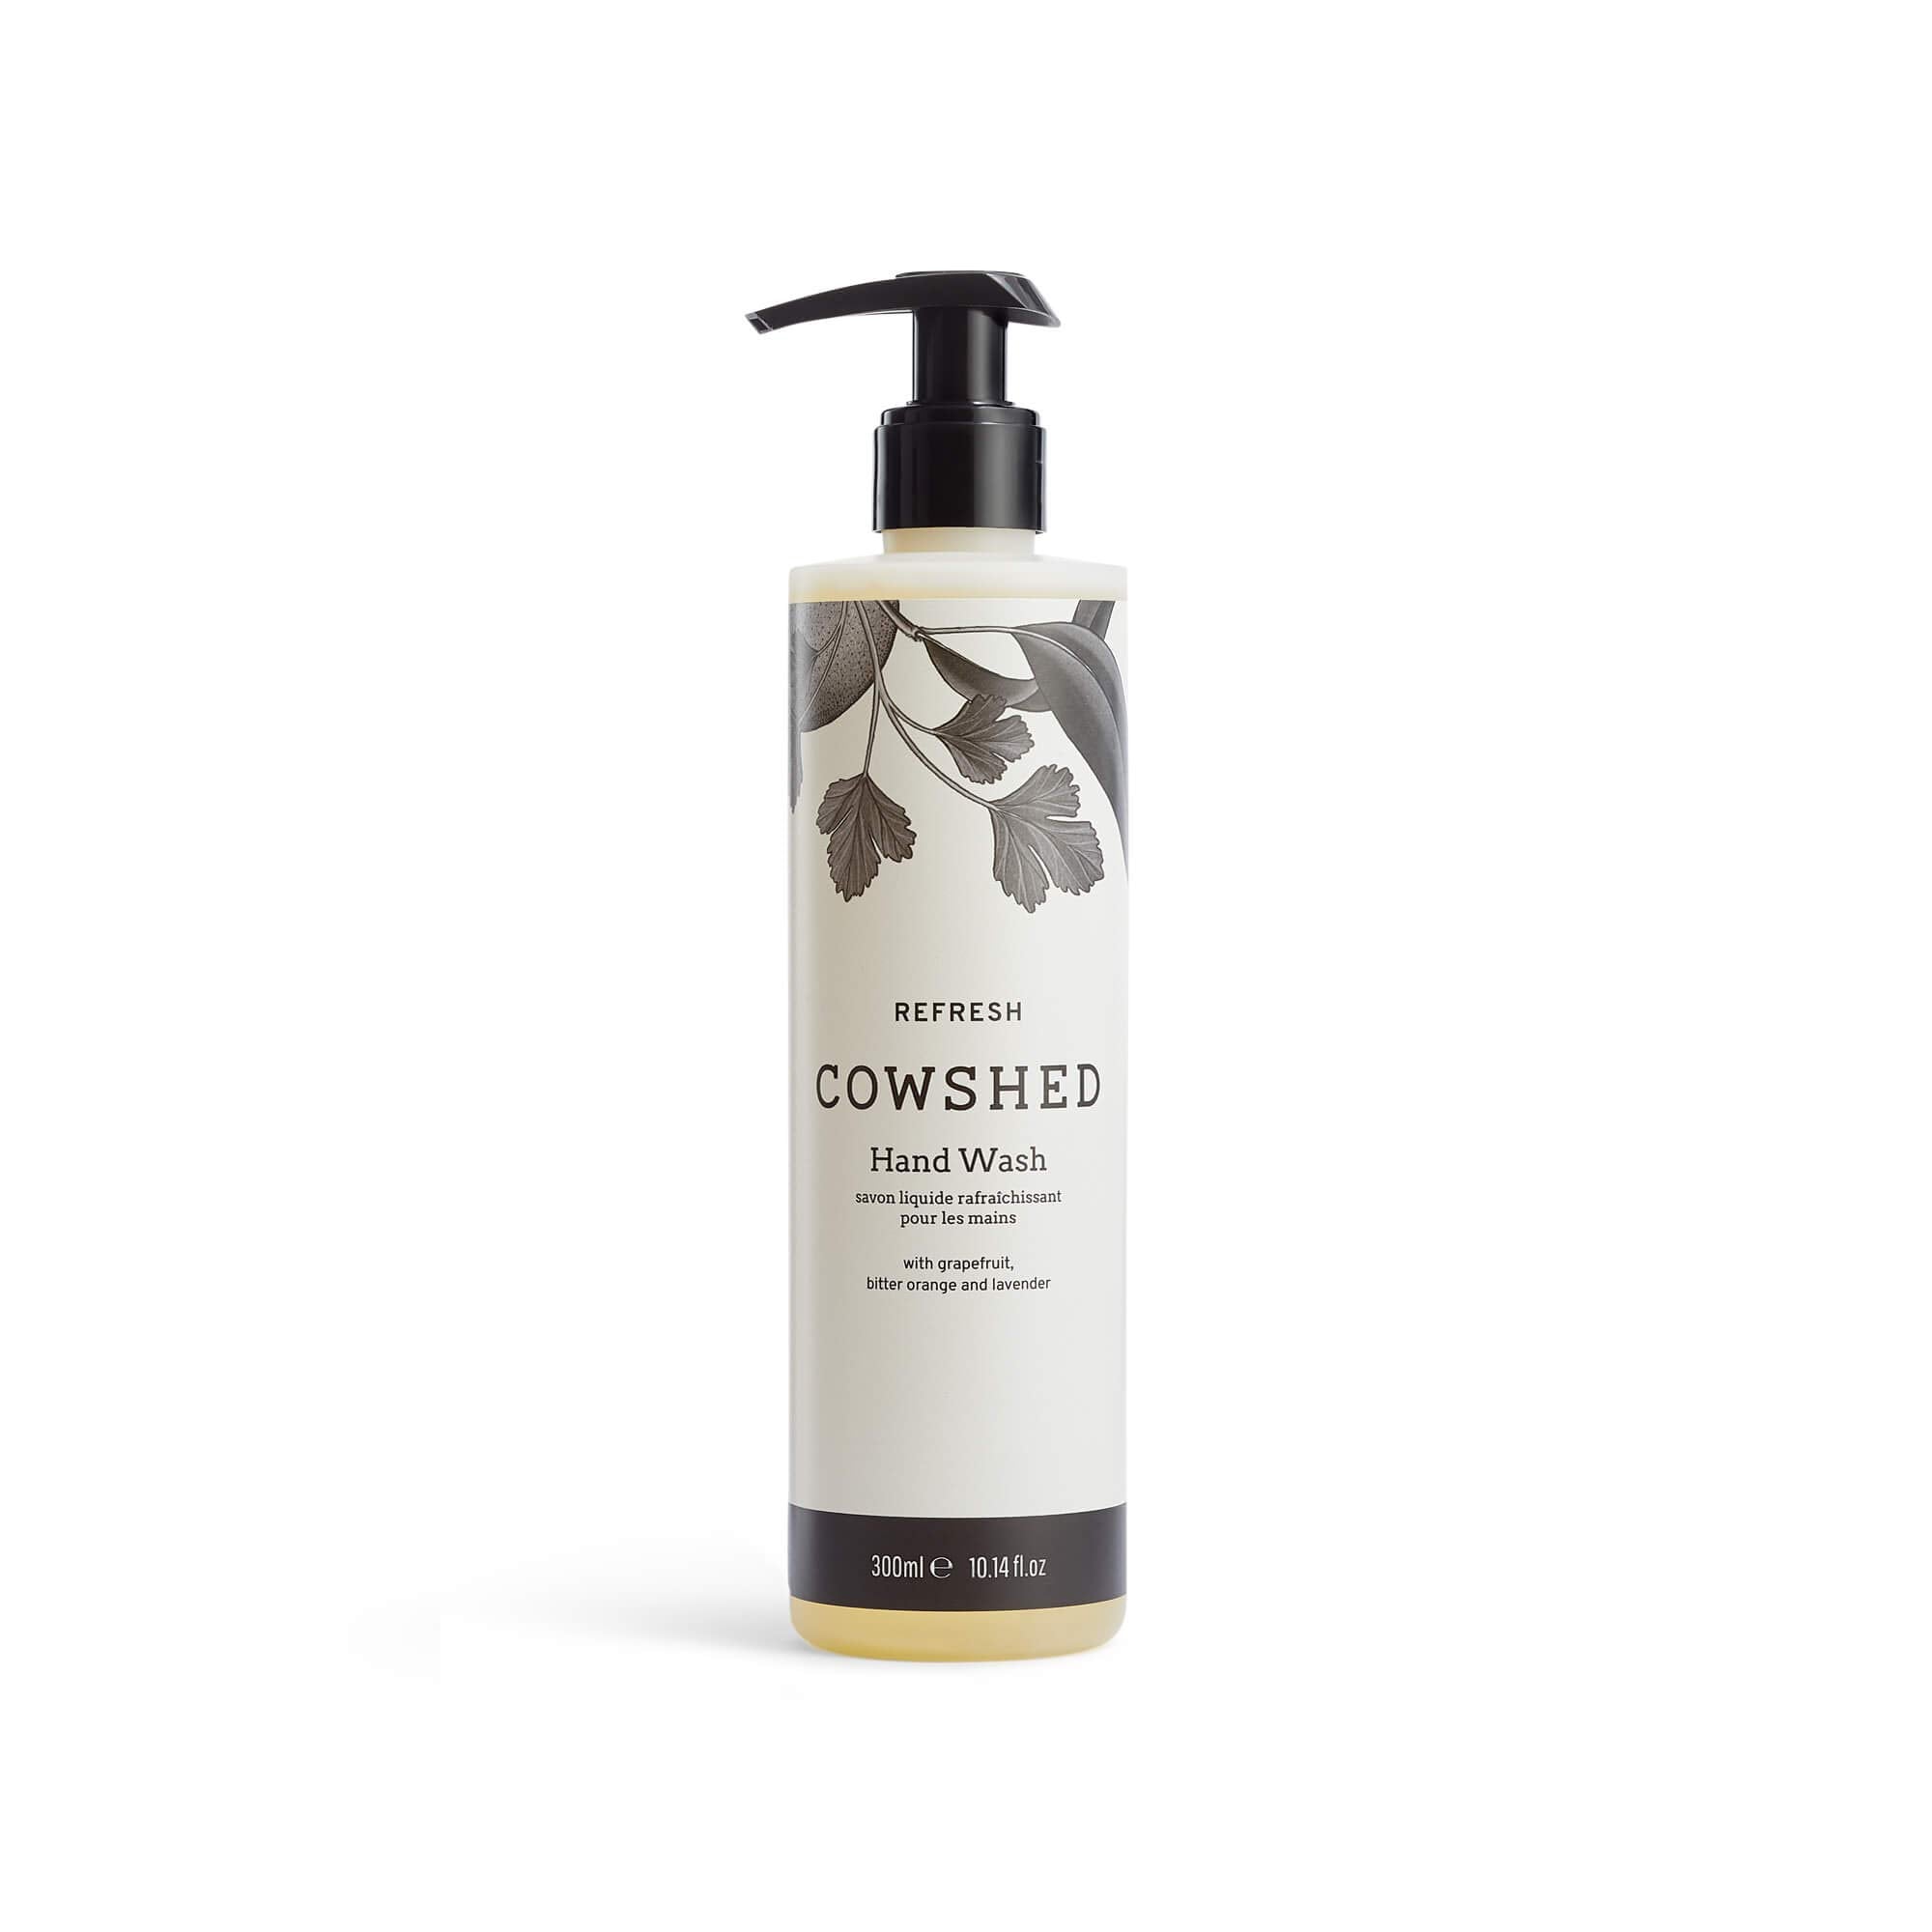 Cowshed Refresh Hand Wash, 300ml